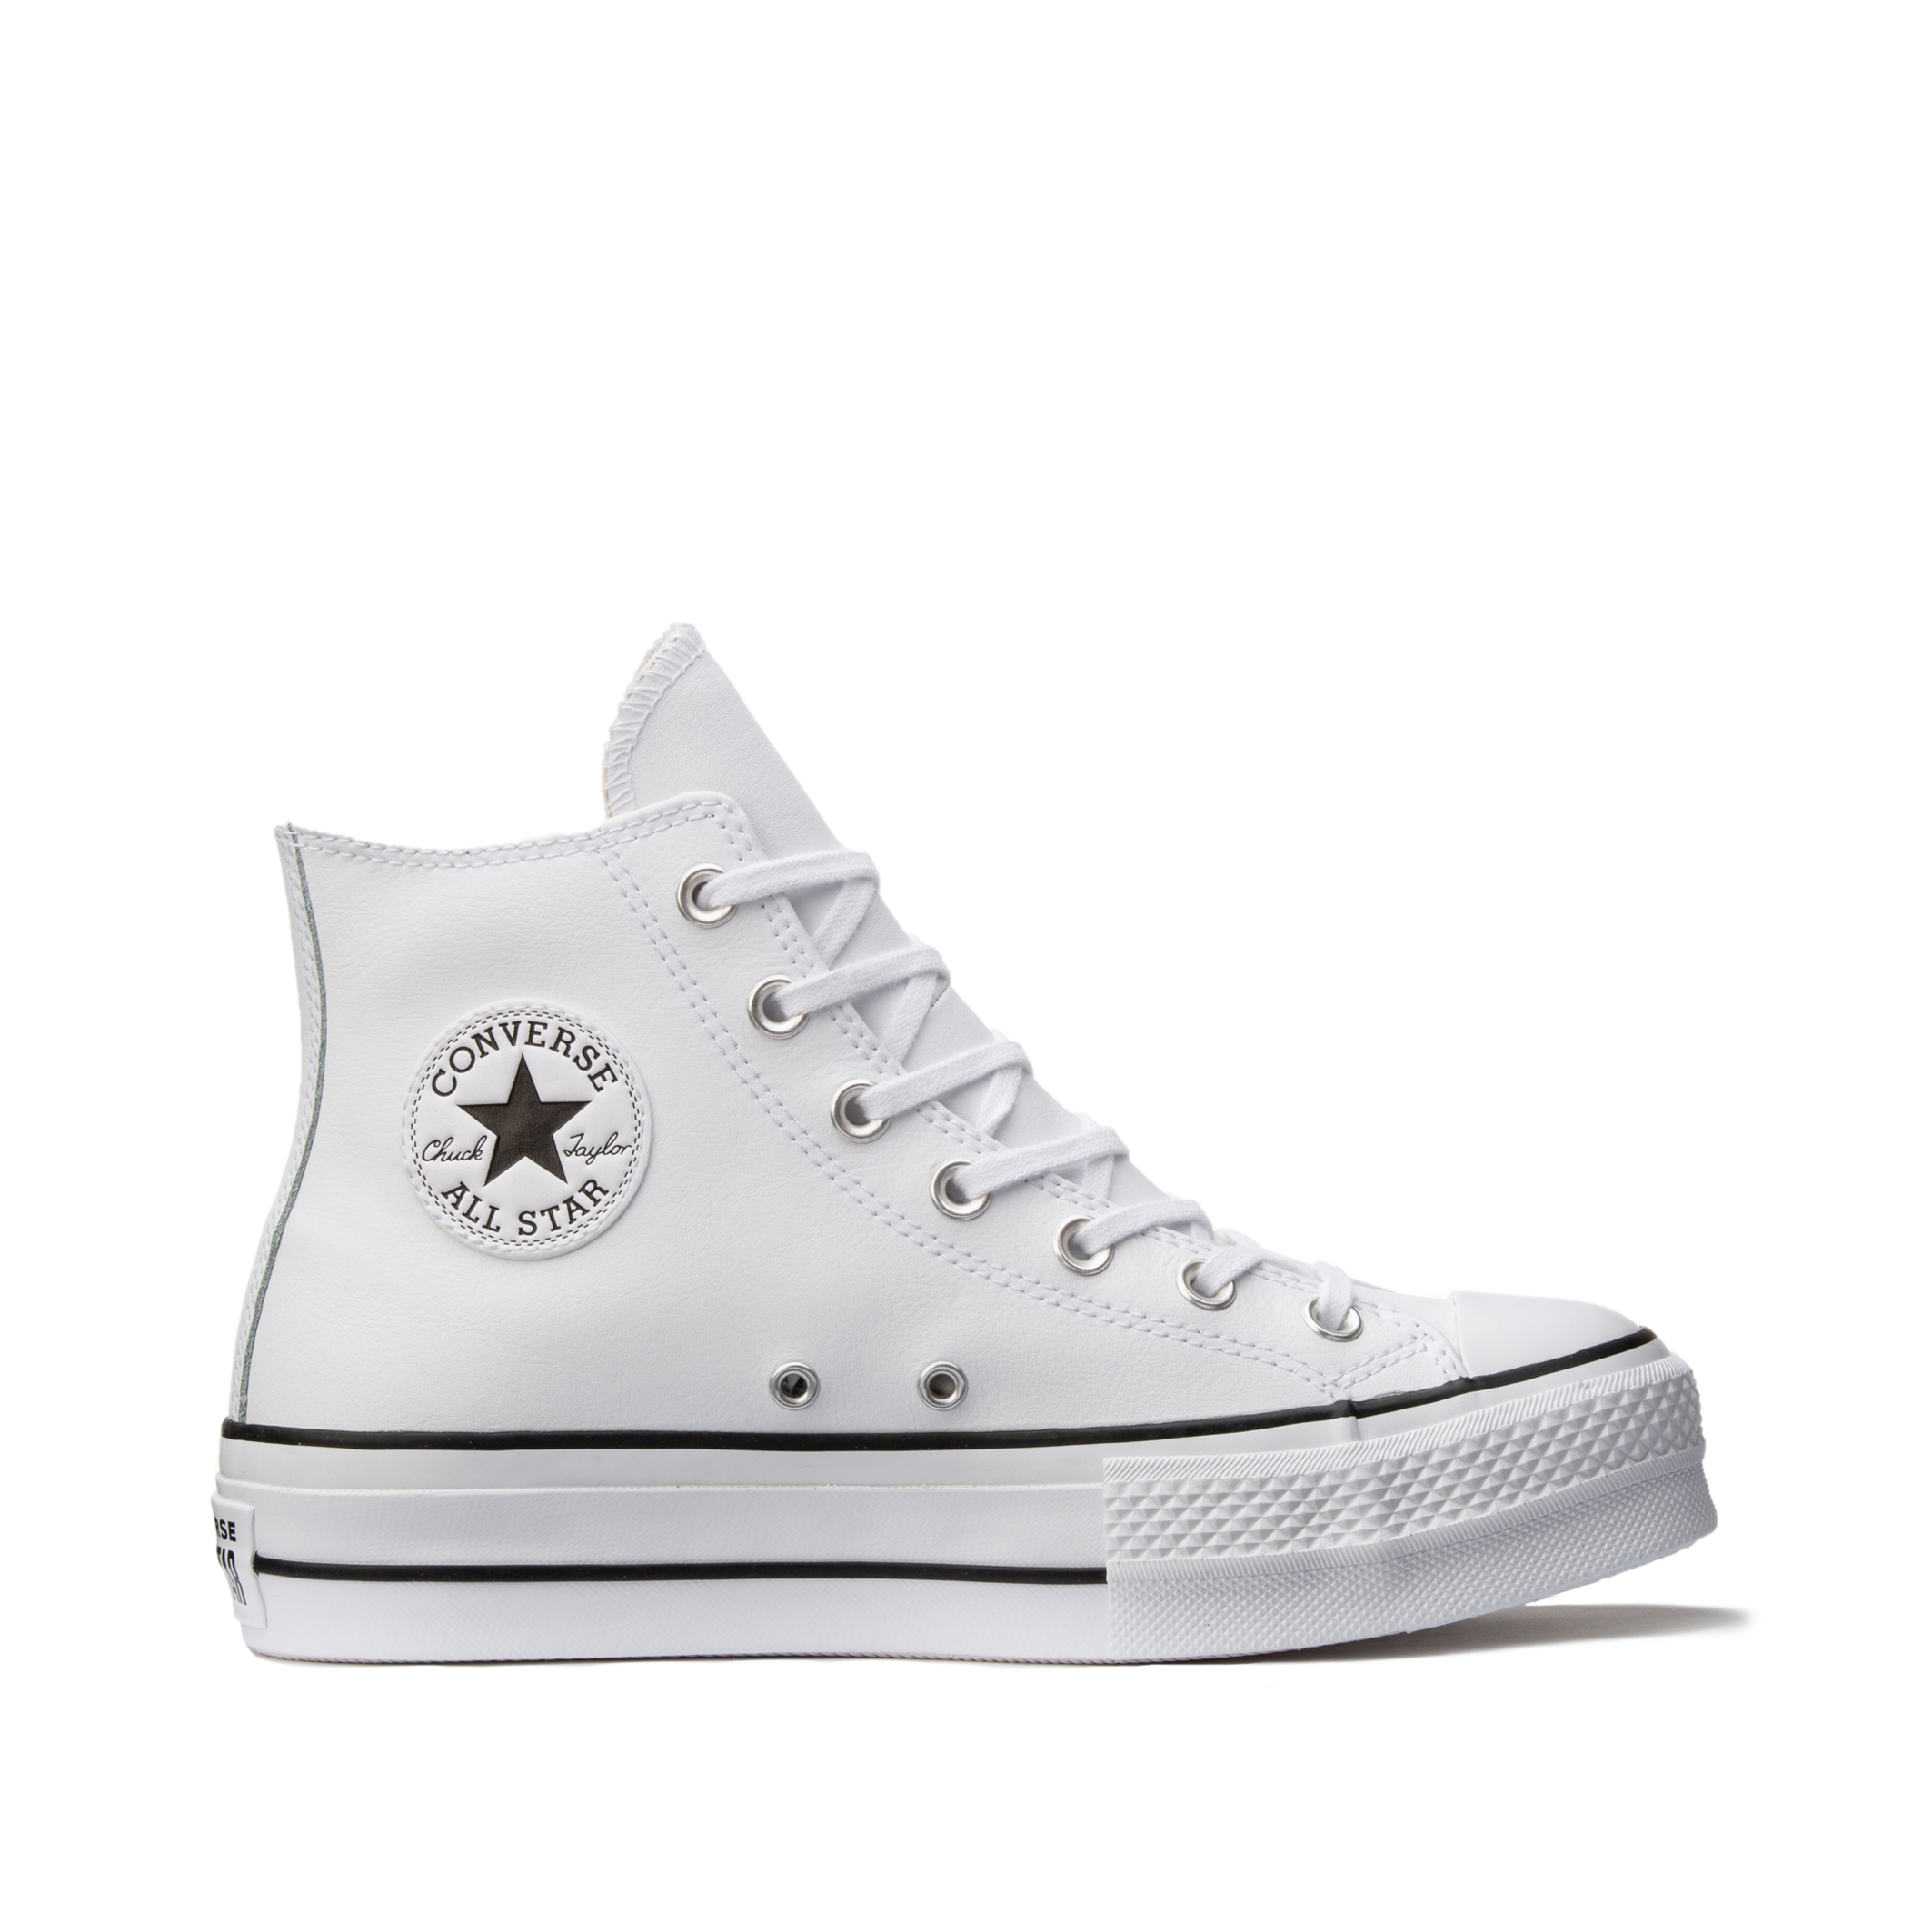 Bloeien Edele Isaac Chuck taylor all star lift leather hi trainers, white, Converse | La Redoute